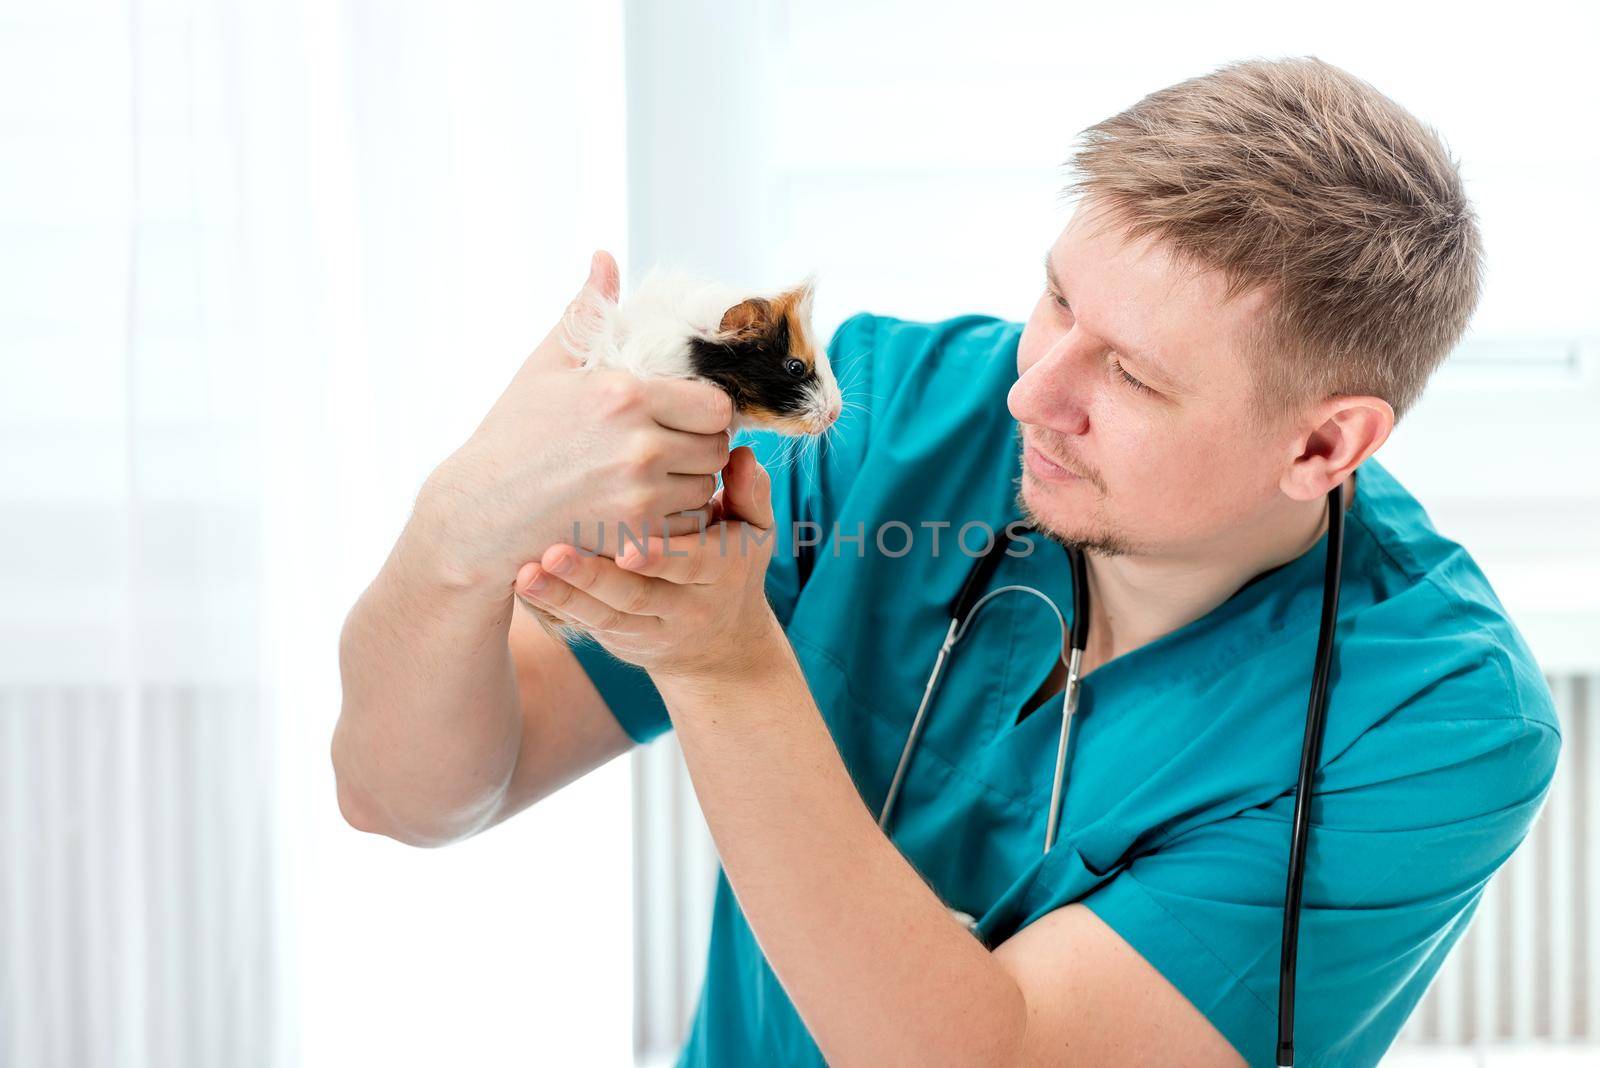 Male veterinarian pet doctor examining guinea pig at vet office. Pet doctor in blue uniform holding small guinea pig and looking at it